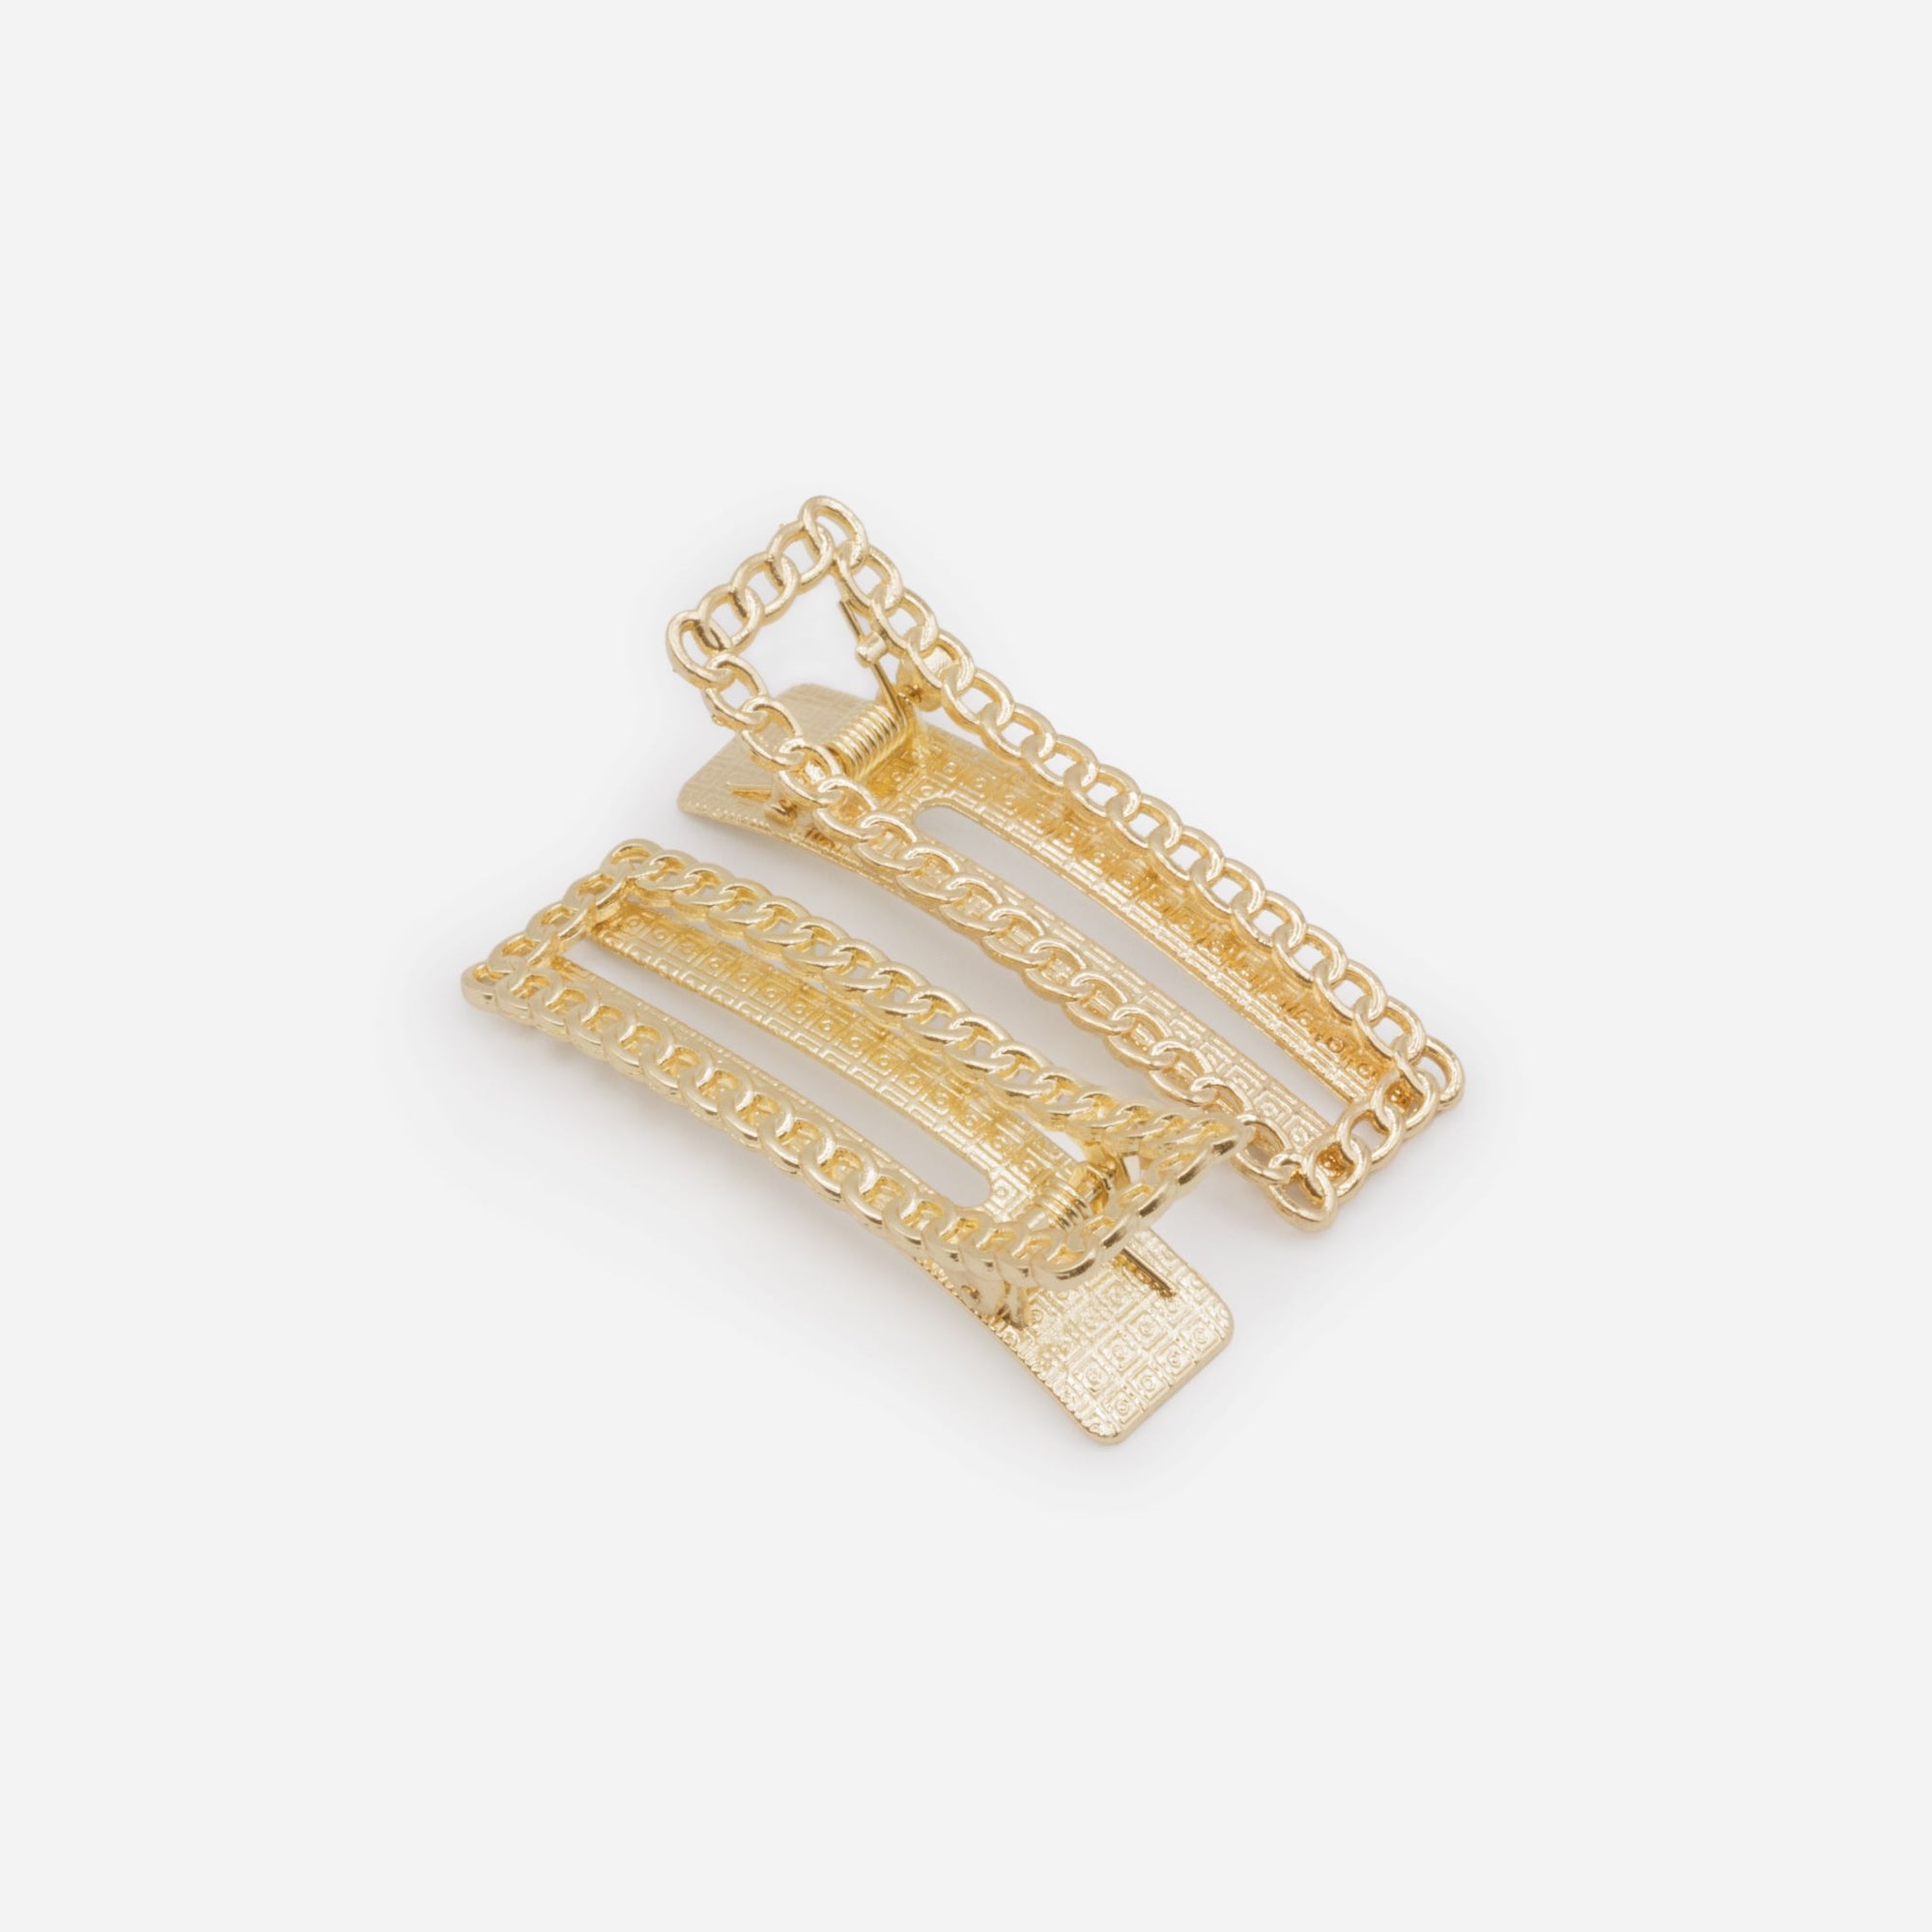 Set of two rectangular clips with gold mesh